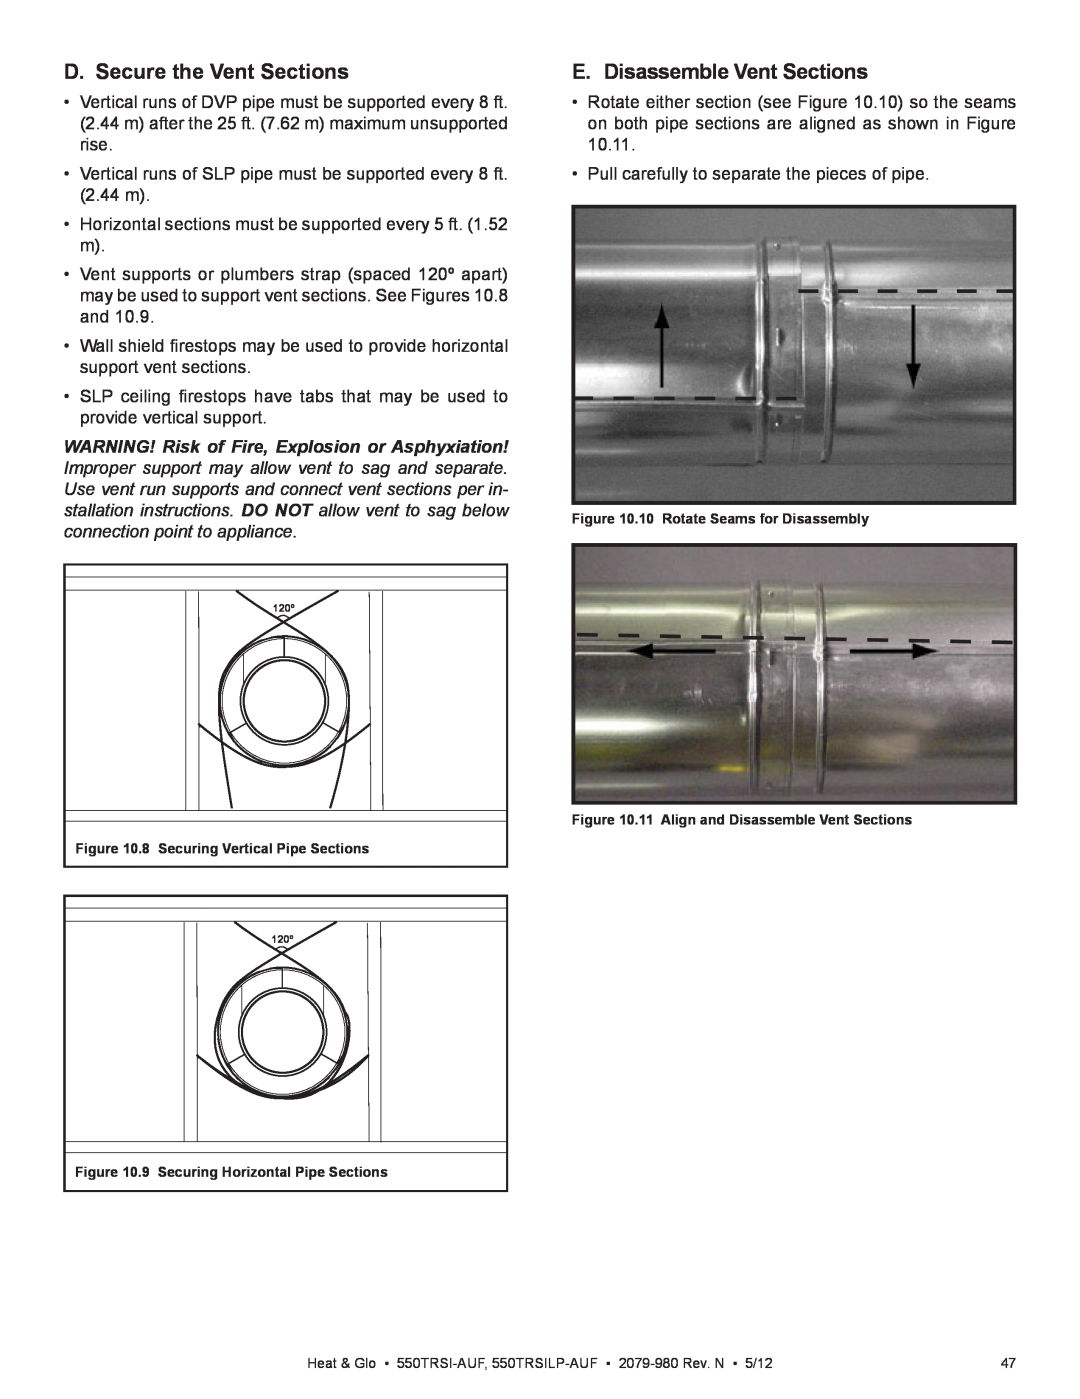 Heat & Glo LifeStyle 550TRSI-AUF owner manual D. Secure the Vent Sections, E. Disassemble Vent Sections 